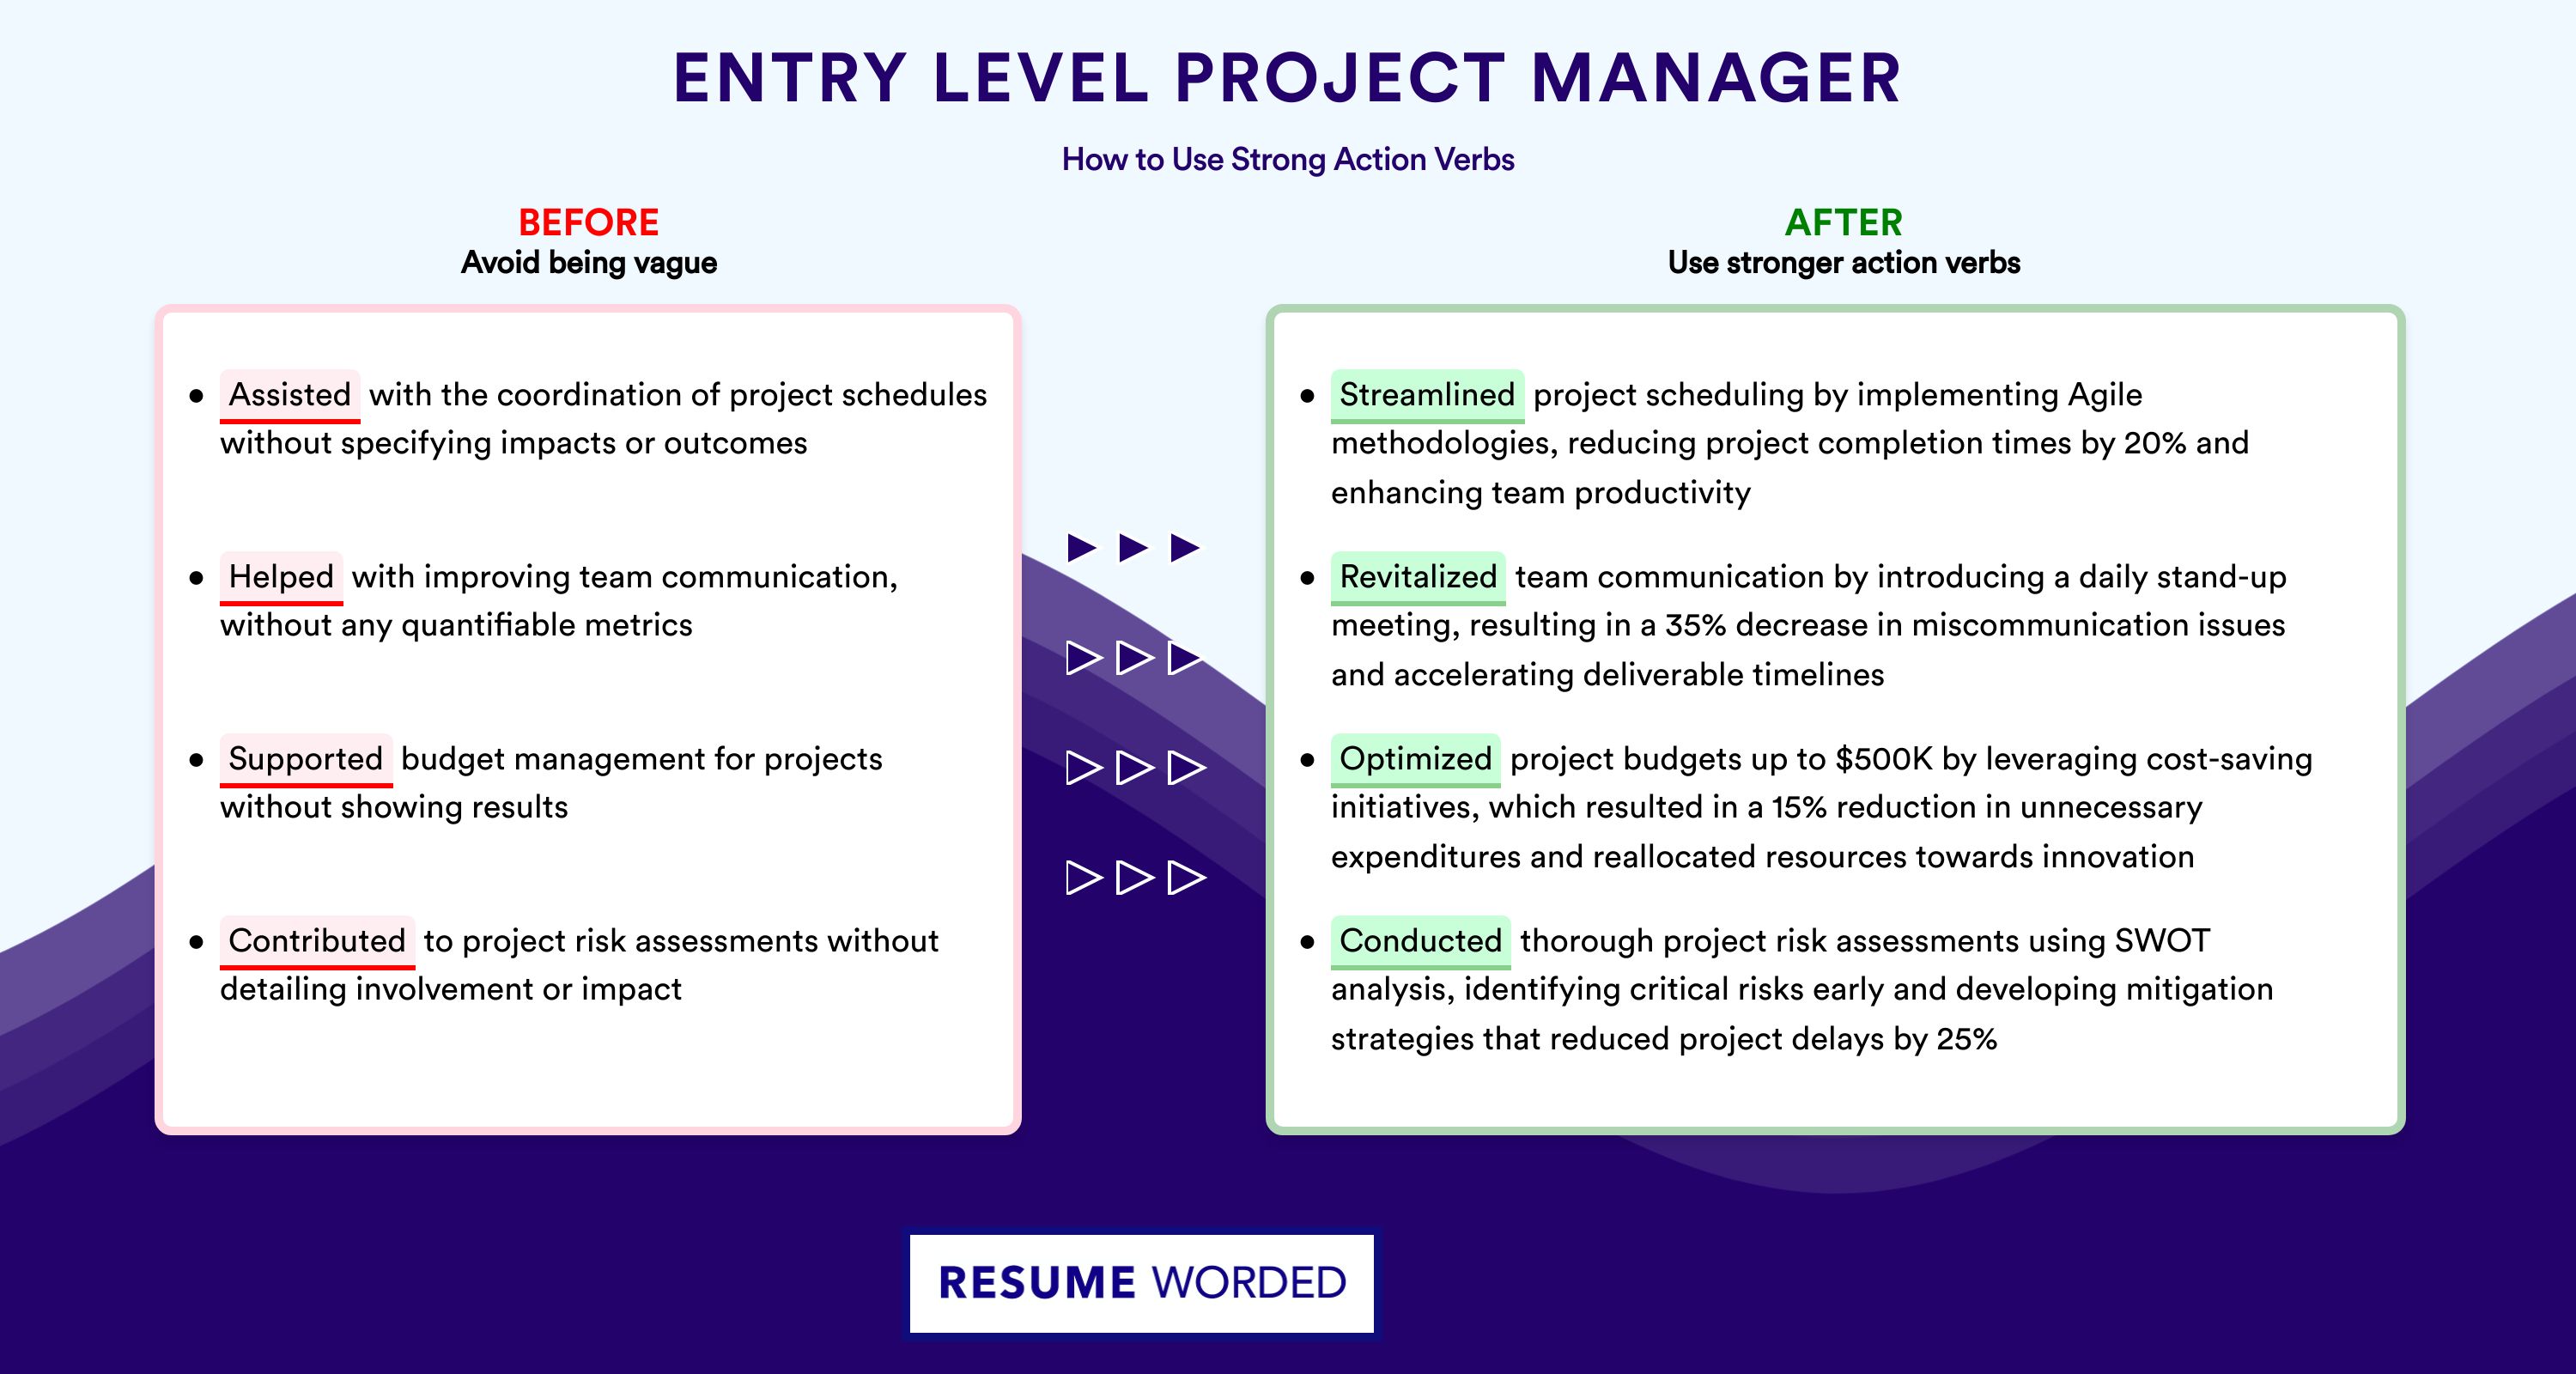 Action Verbs for Entry Level Project Manager